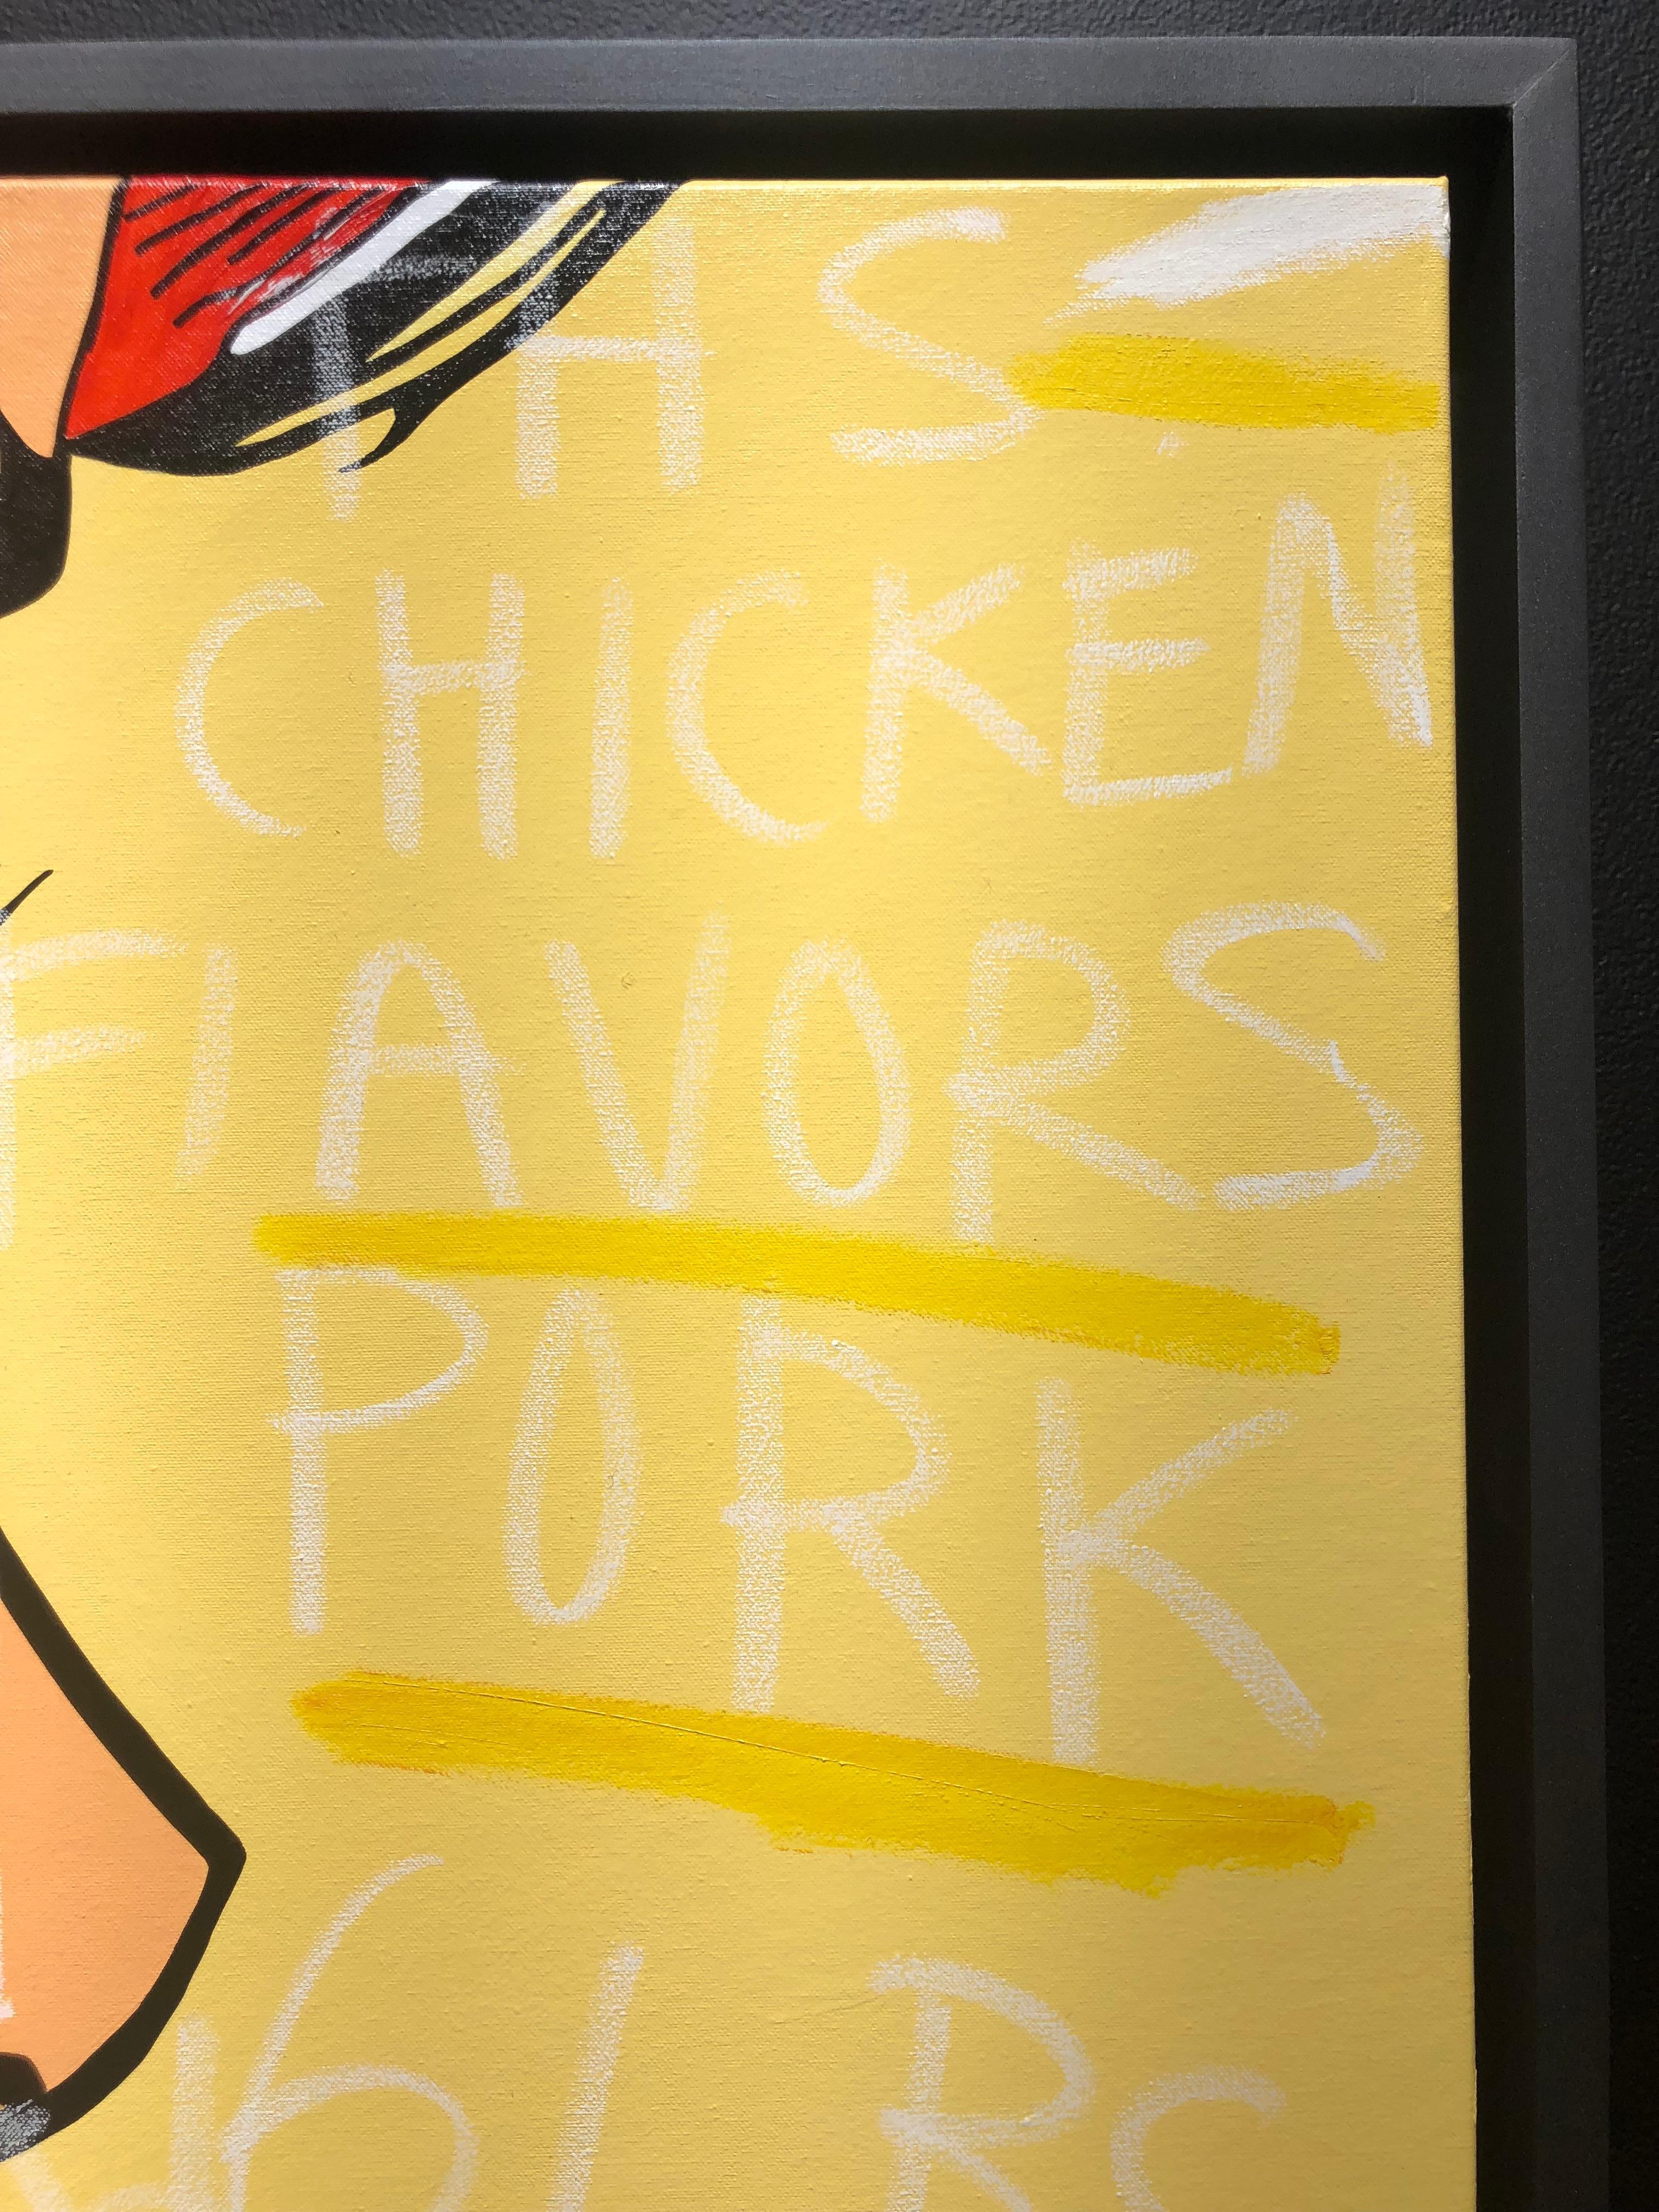 A. Gomez, Chacked Chicken Adult Flavors 3